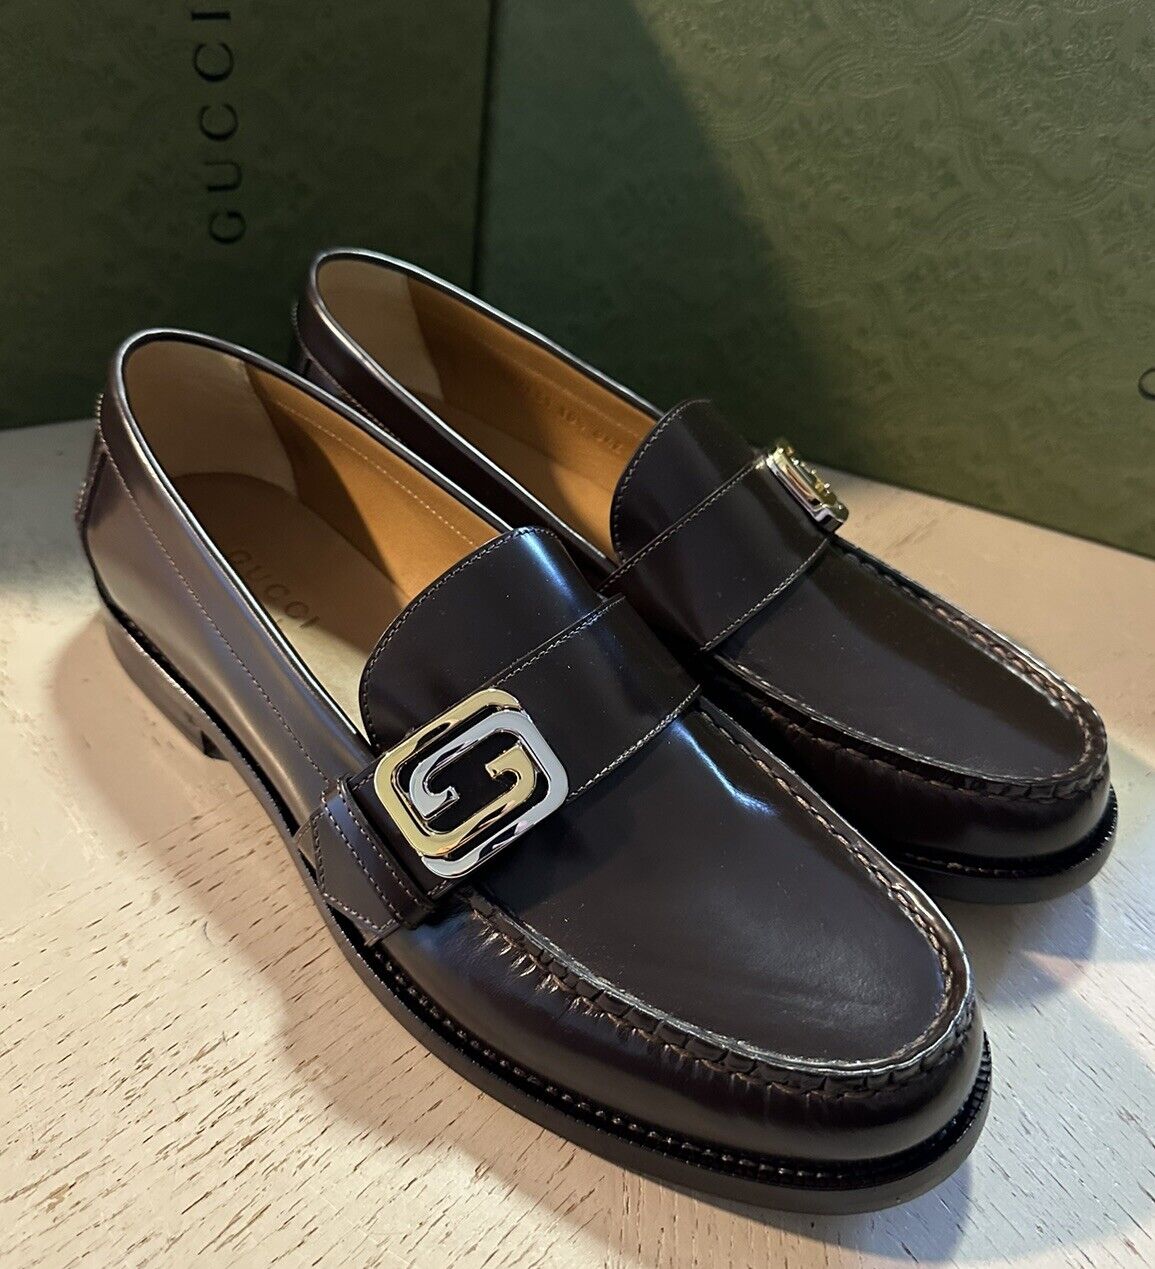 NIB Gucci Mens Loafers Moccasin GG Logo Shoes Night Cocoa 10 US/9.5 UK 723631